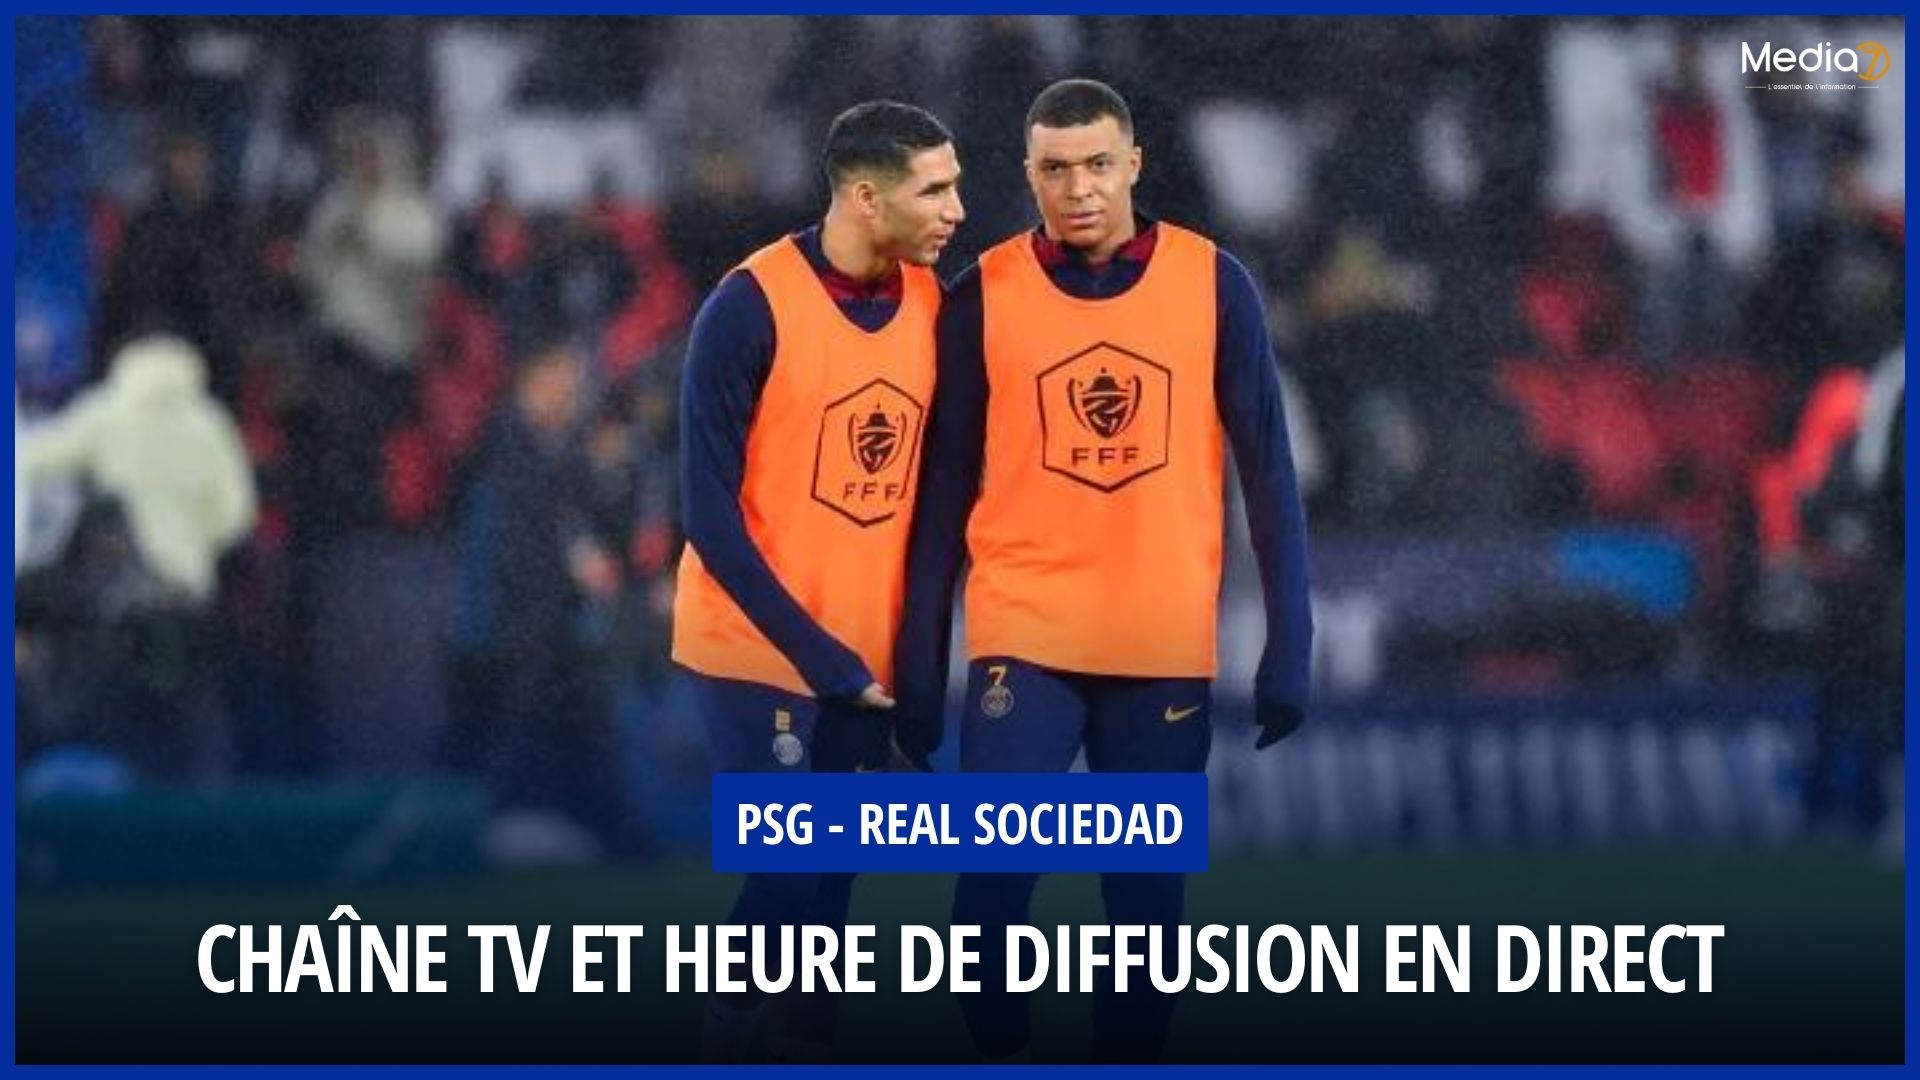 Broadcast of the PSG - Real Sociedad Match Live: Schedule, TV Channel and Streaming - Media7